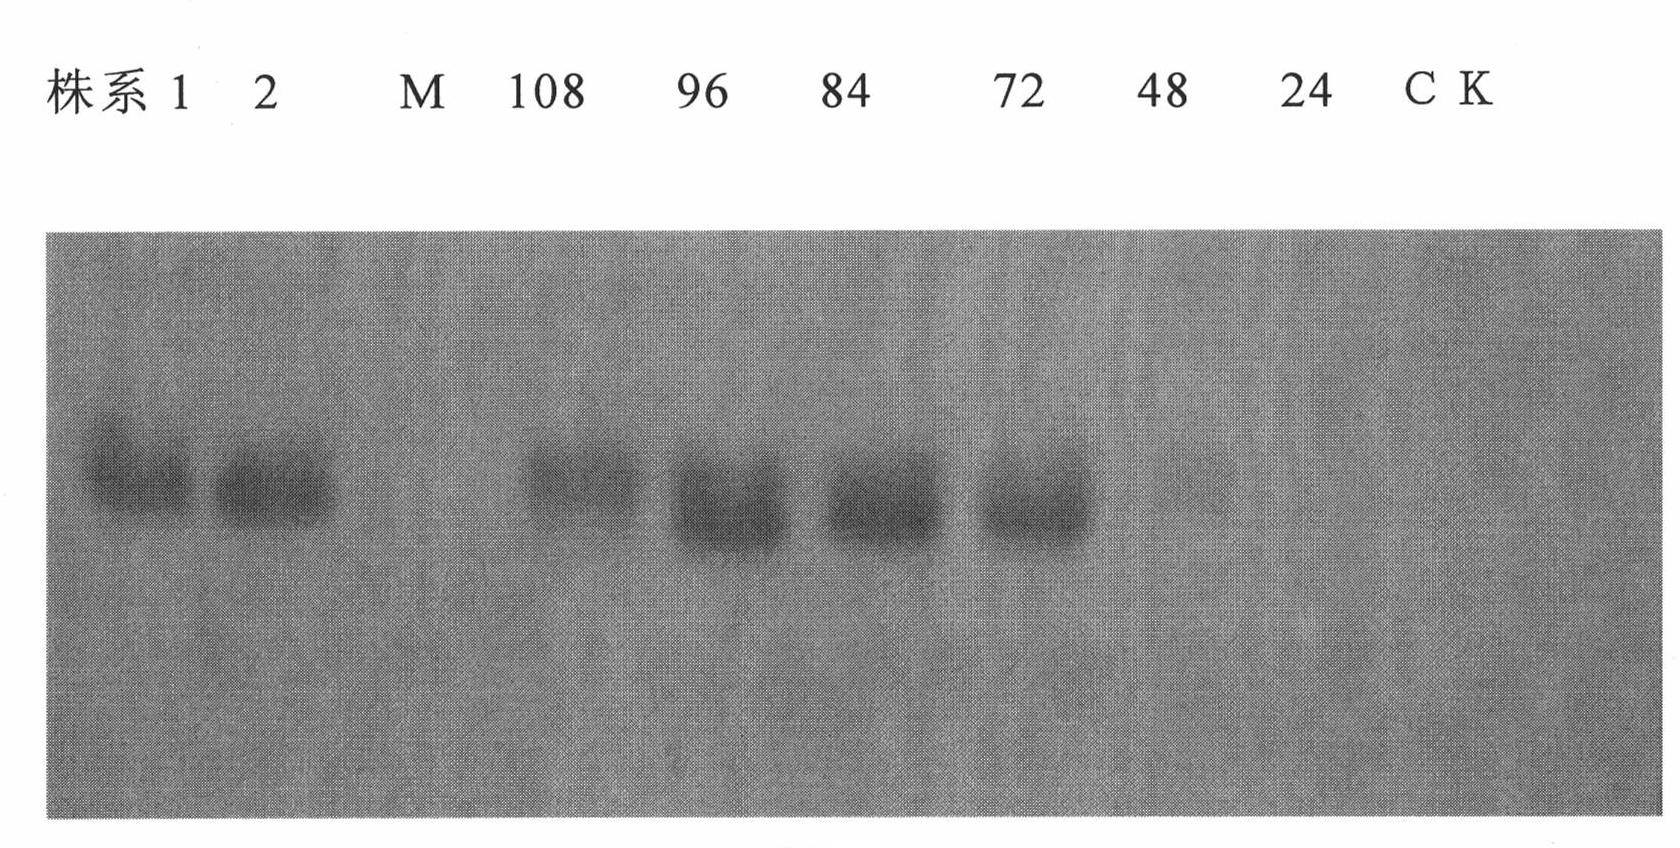 Hydatidovis soluble antigen preparation method and product thereof